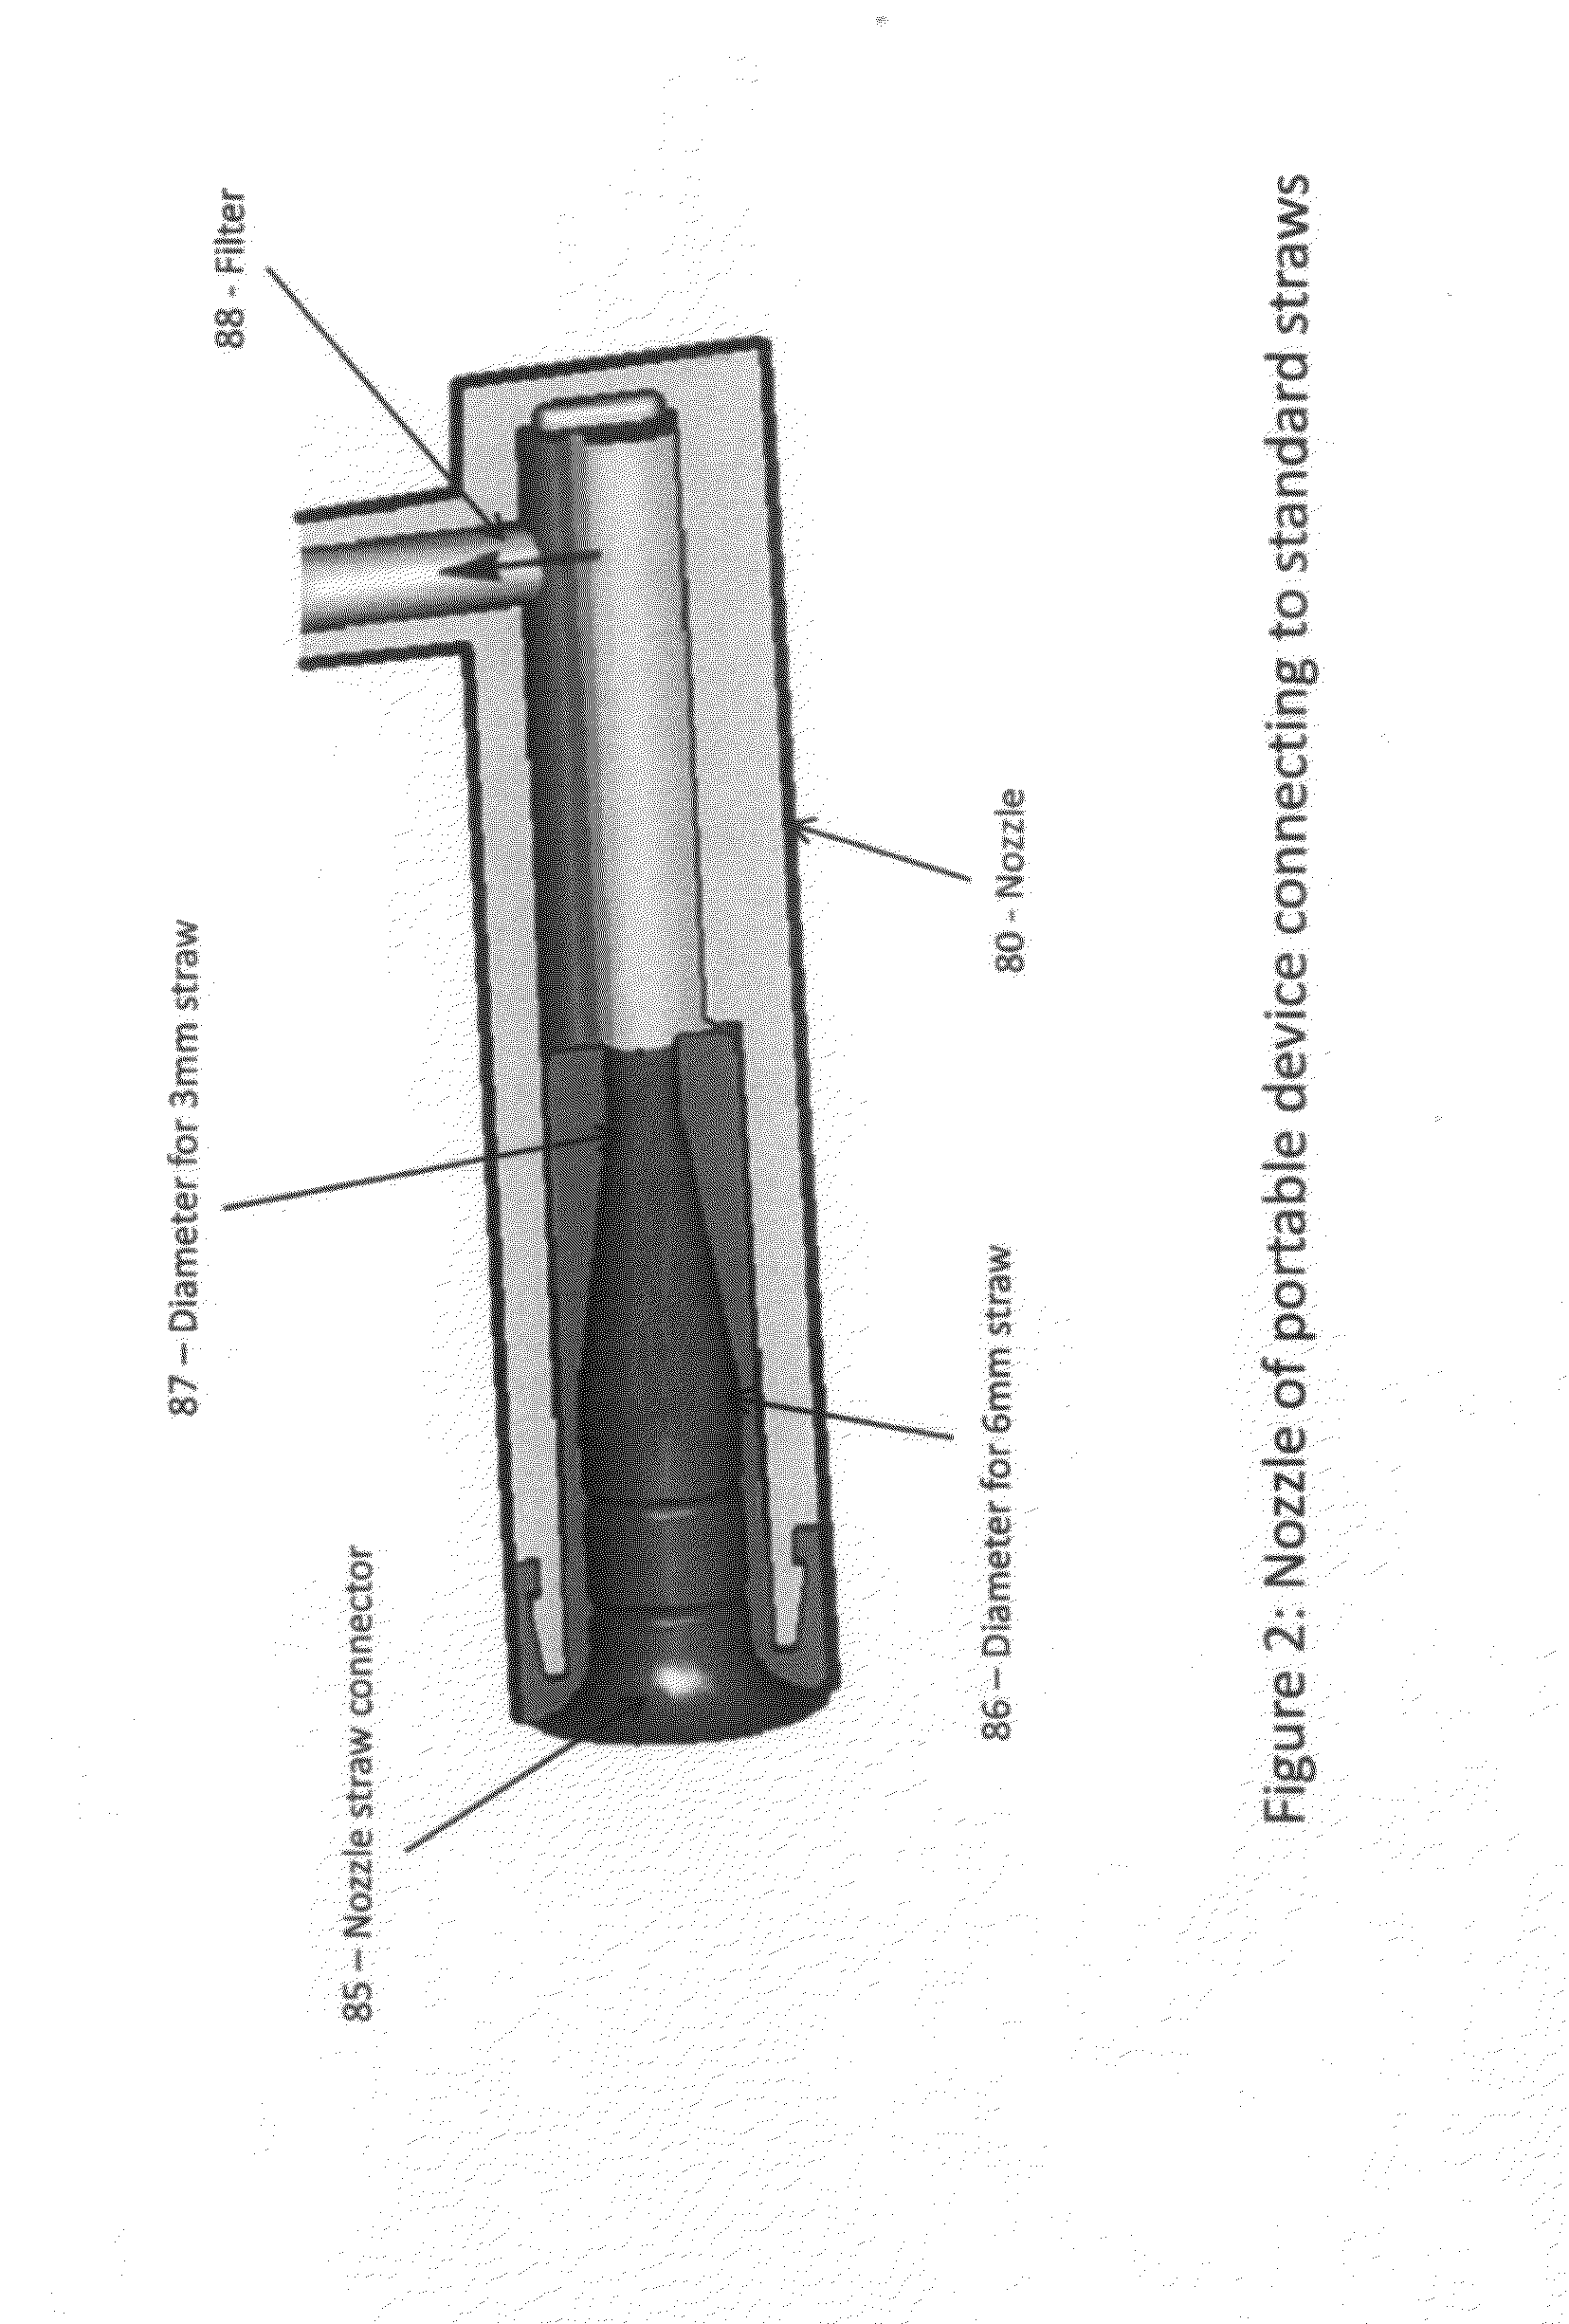 Portable device for measuring blood alcohol level by using a mobile device susch as a phone, tablet or laptop